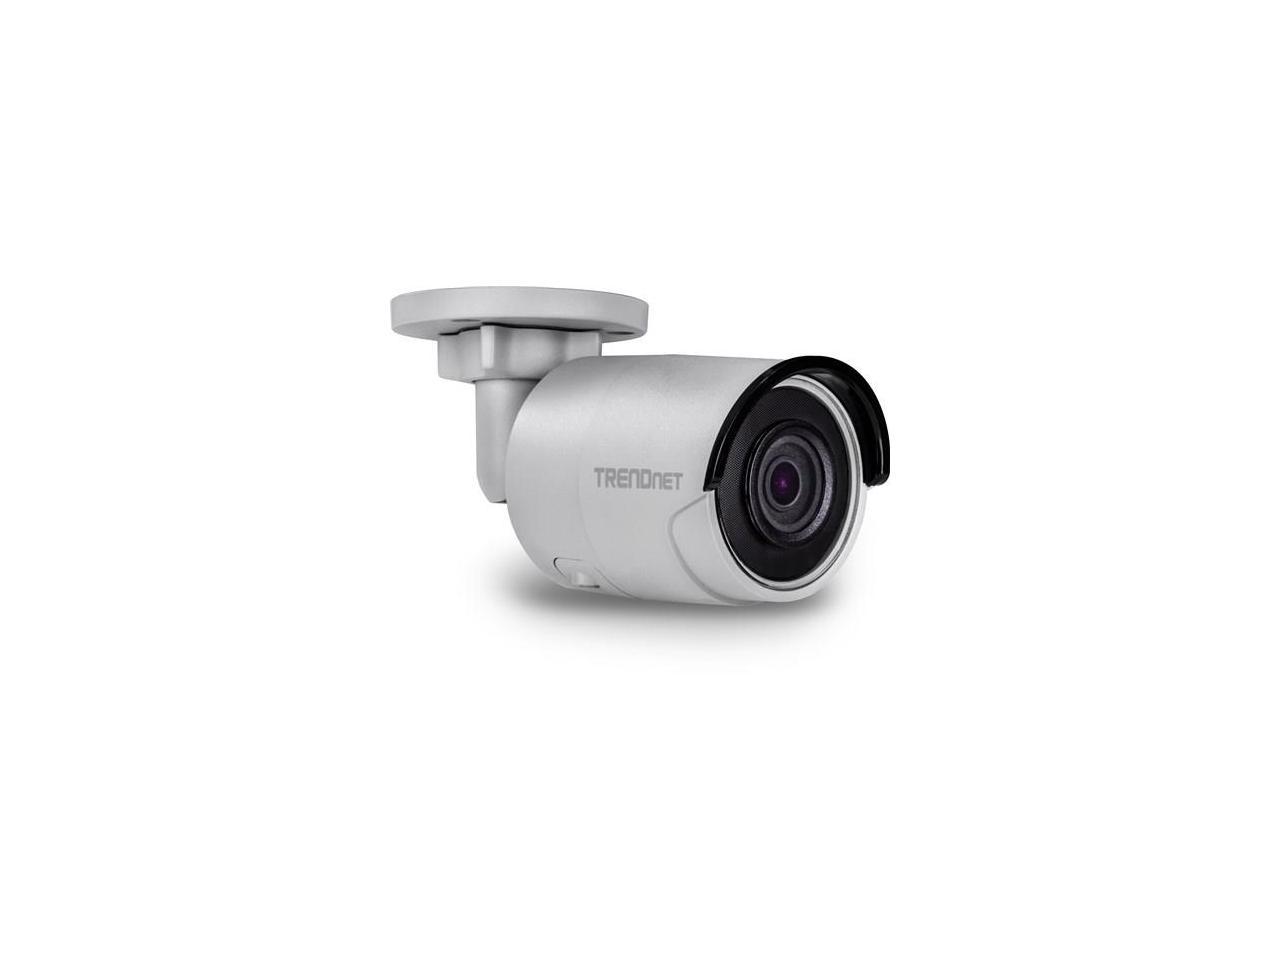 TRENDnet TV-IP318PI 8MP Outdoor Network Bullet Camera with Night Vision